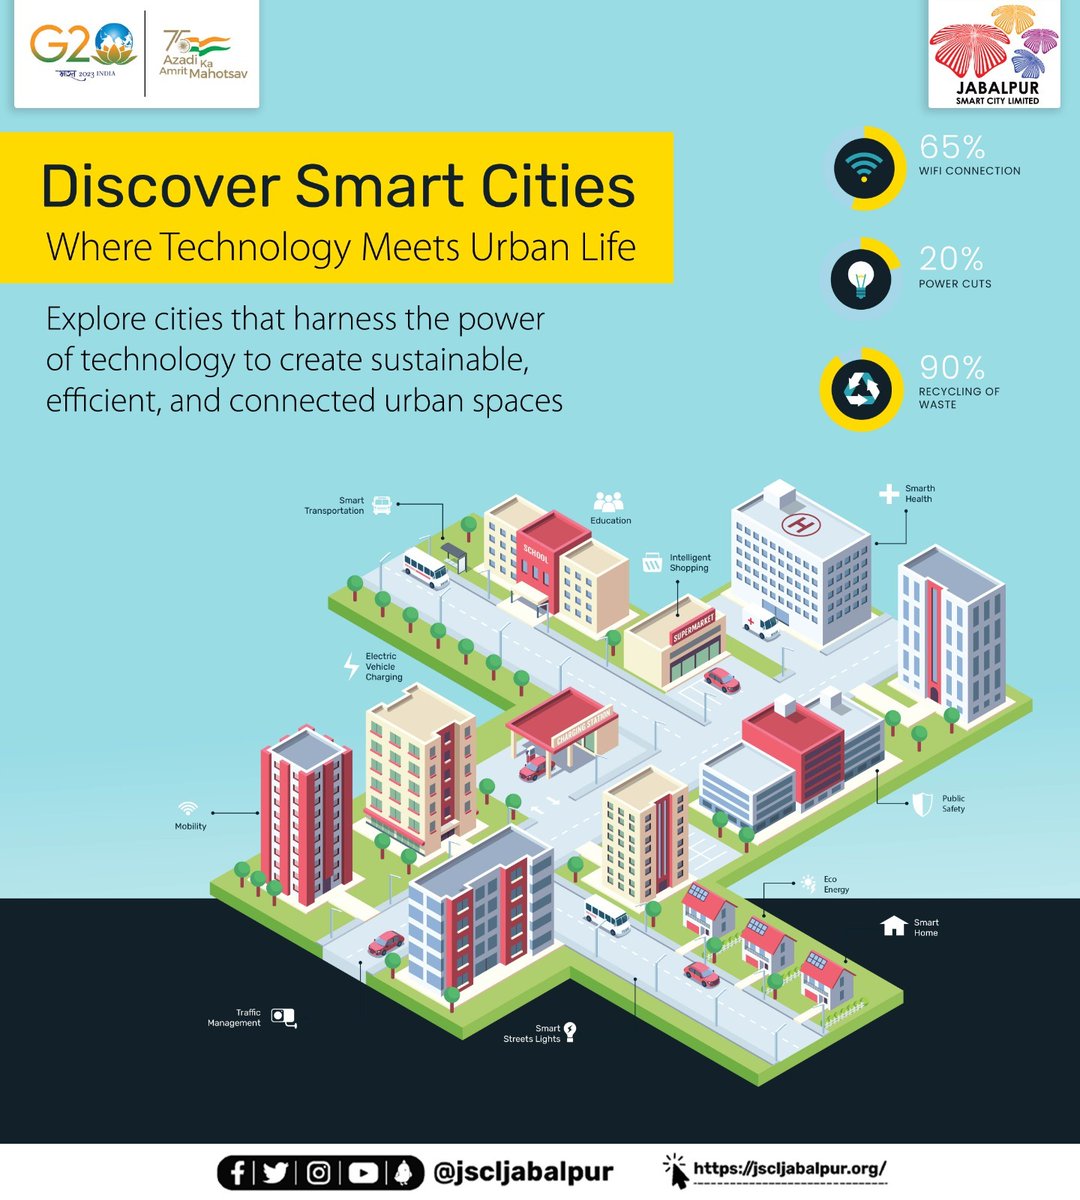 Embrace the Future in Smart Cities! 🏙️

Discover how urban life is transformed through technology, creating sustainable and connected spaces. 🌆✨ 

#SmartCities #UrbanInnovation #TechRevolution #SustainableLiving #FutureOfCities